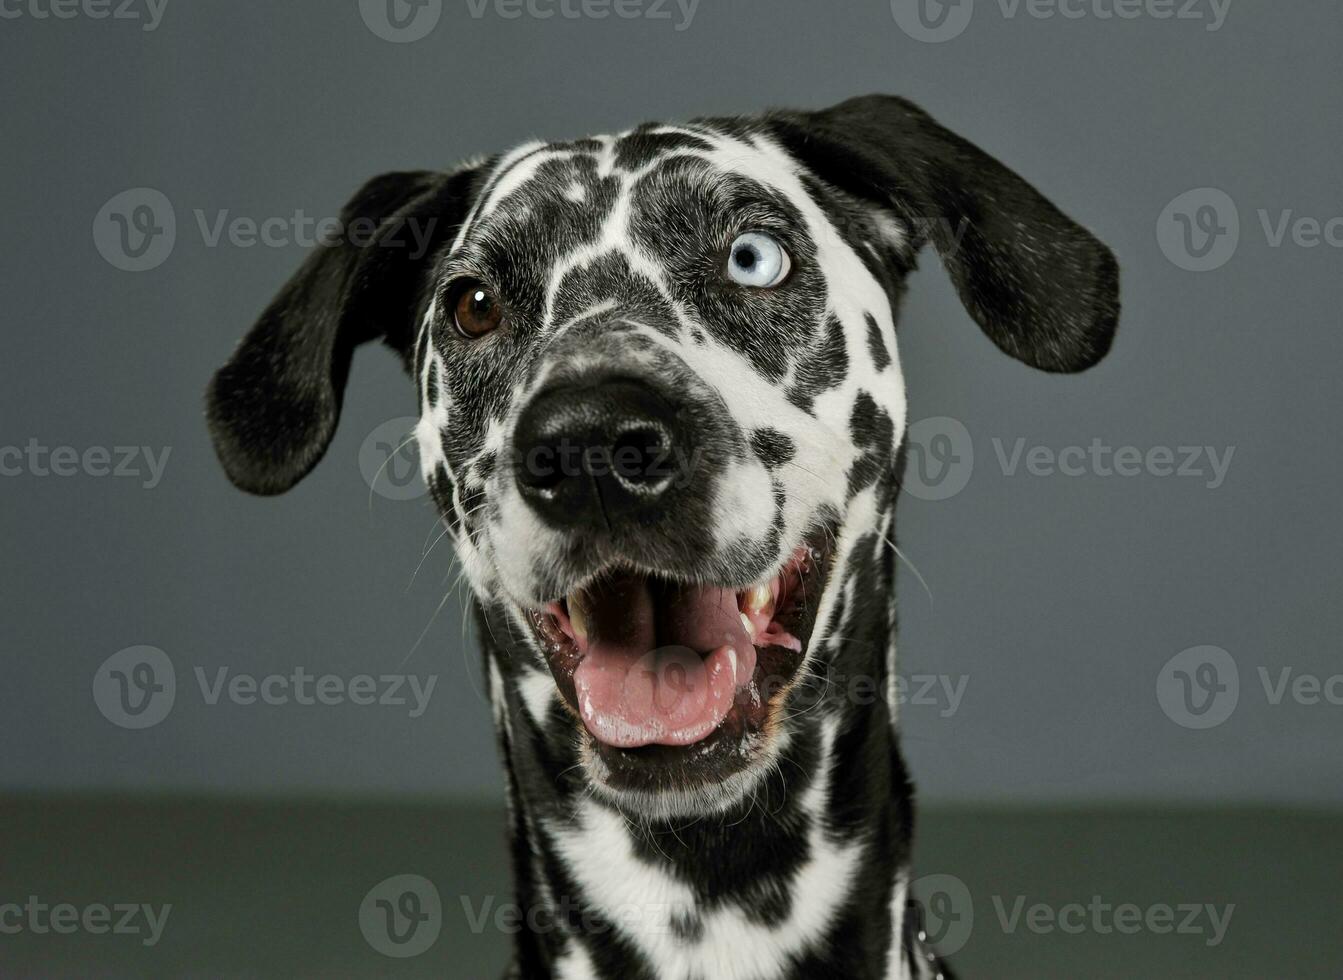 Portrait of an adorable Dalmatian dog with different colored eyes looking curiously at the camera photo